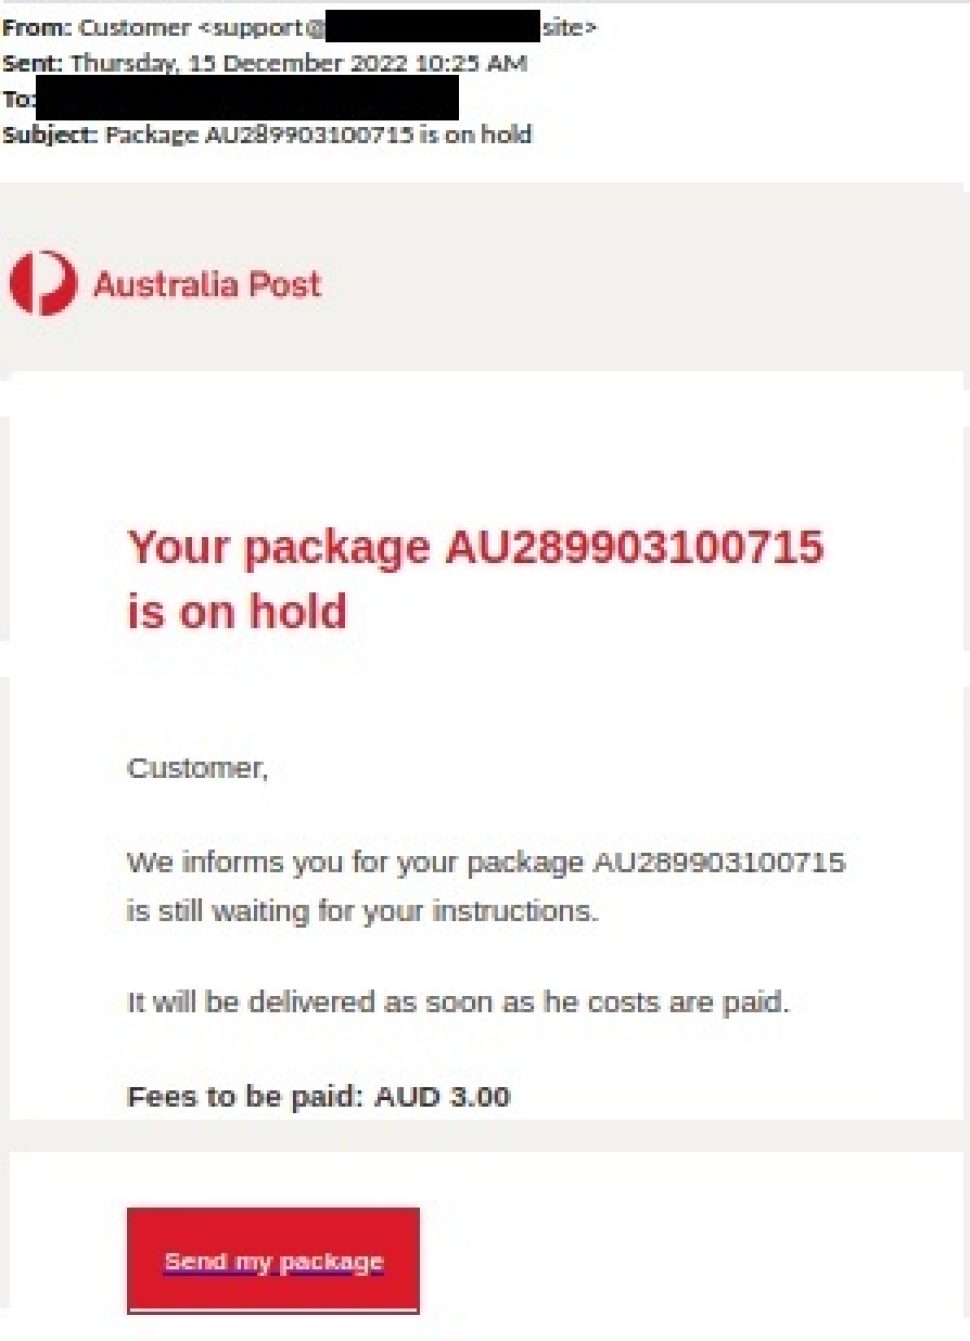 The subject of the Email reads ‘Your package AU289903100715 is on hold’
the message has a Australia Post logo  and reads as below.

“Customer, We inform you for your package AU289903100715 is still awaiting ”
There is a refer your instructions.
It will be delivered as soon as the costs are paid. Fees to be paid AUD 3.00”

There is a red button to click on with “Send my package” written on it.